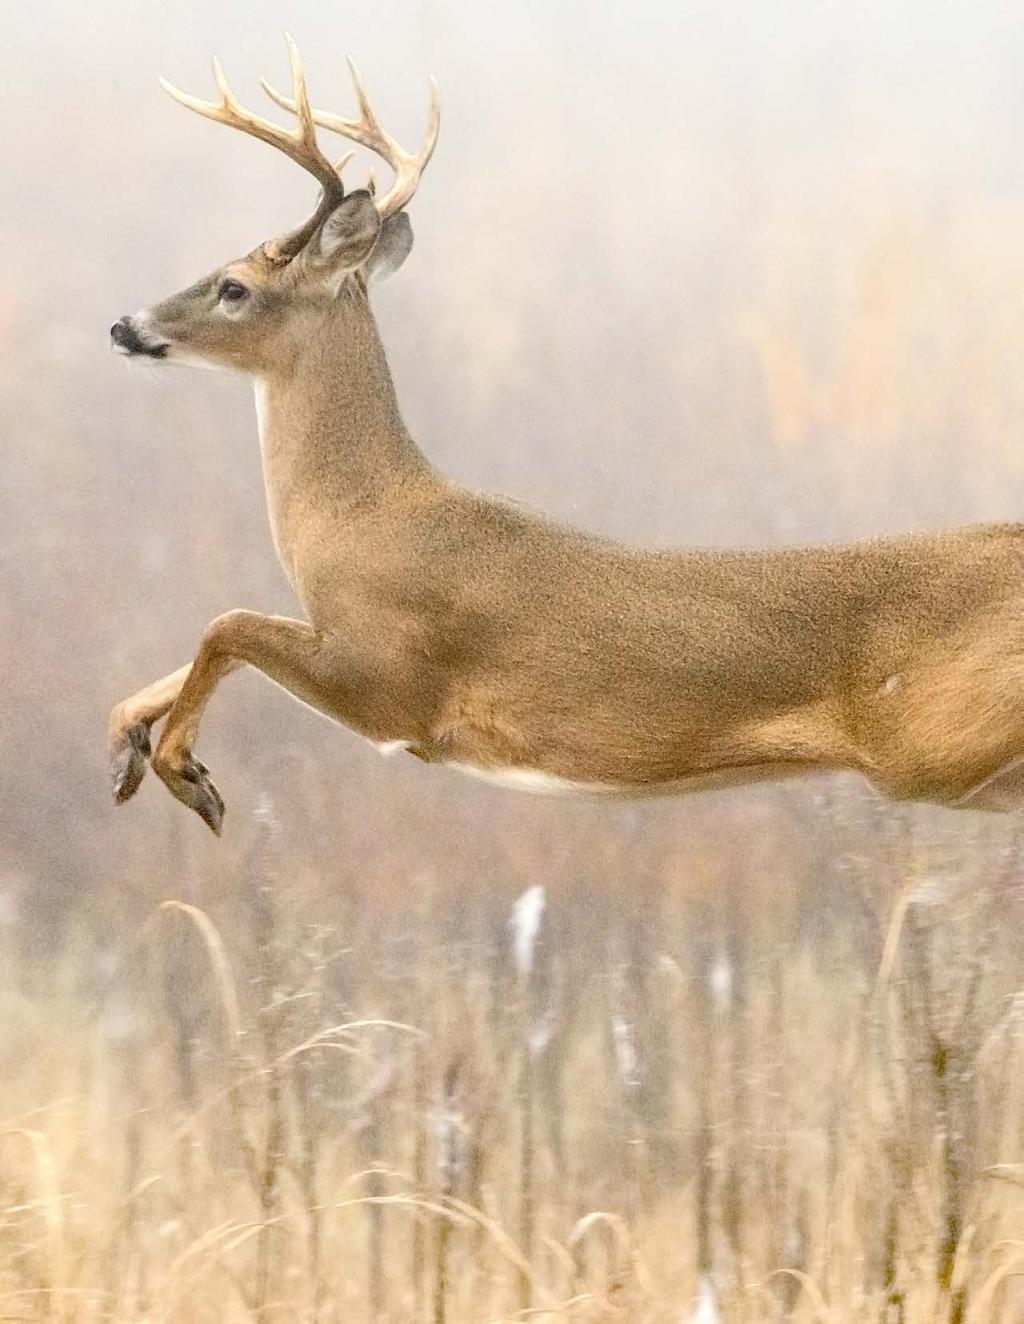 New Hampshire s deer population has more than tripled in 30 years. Here s the science behind Fish and Game s deer management success.